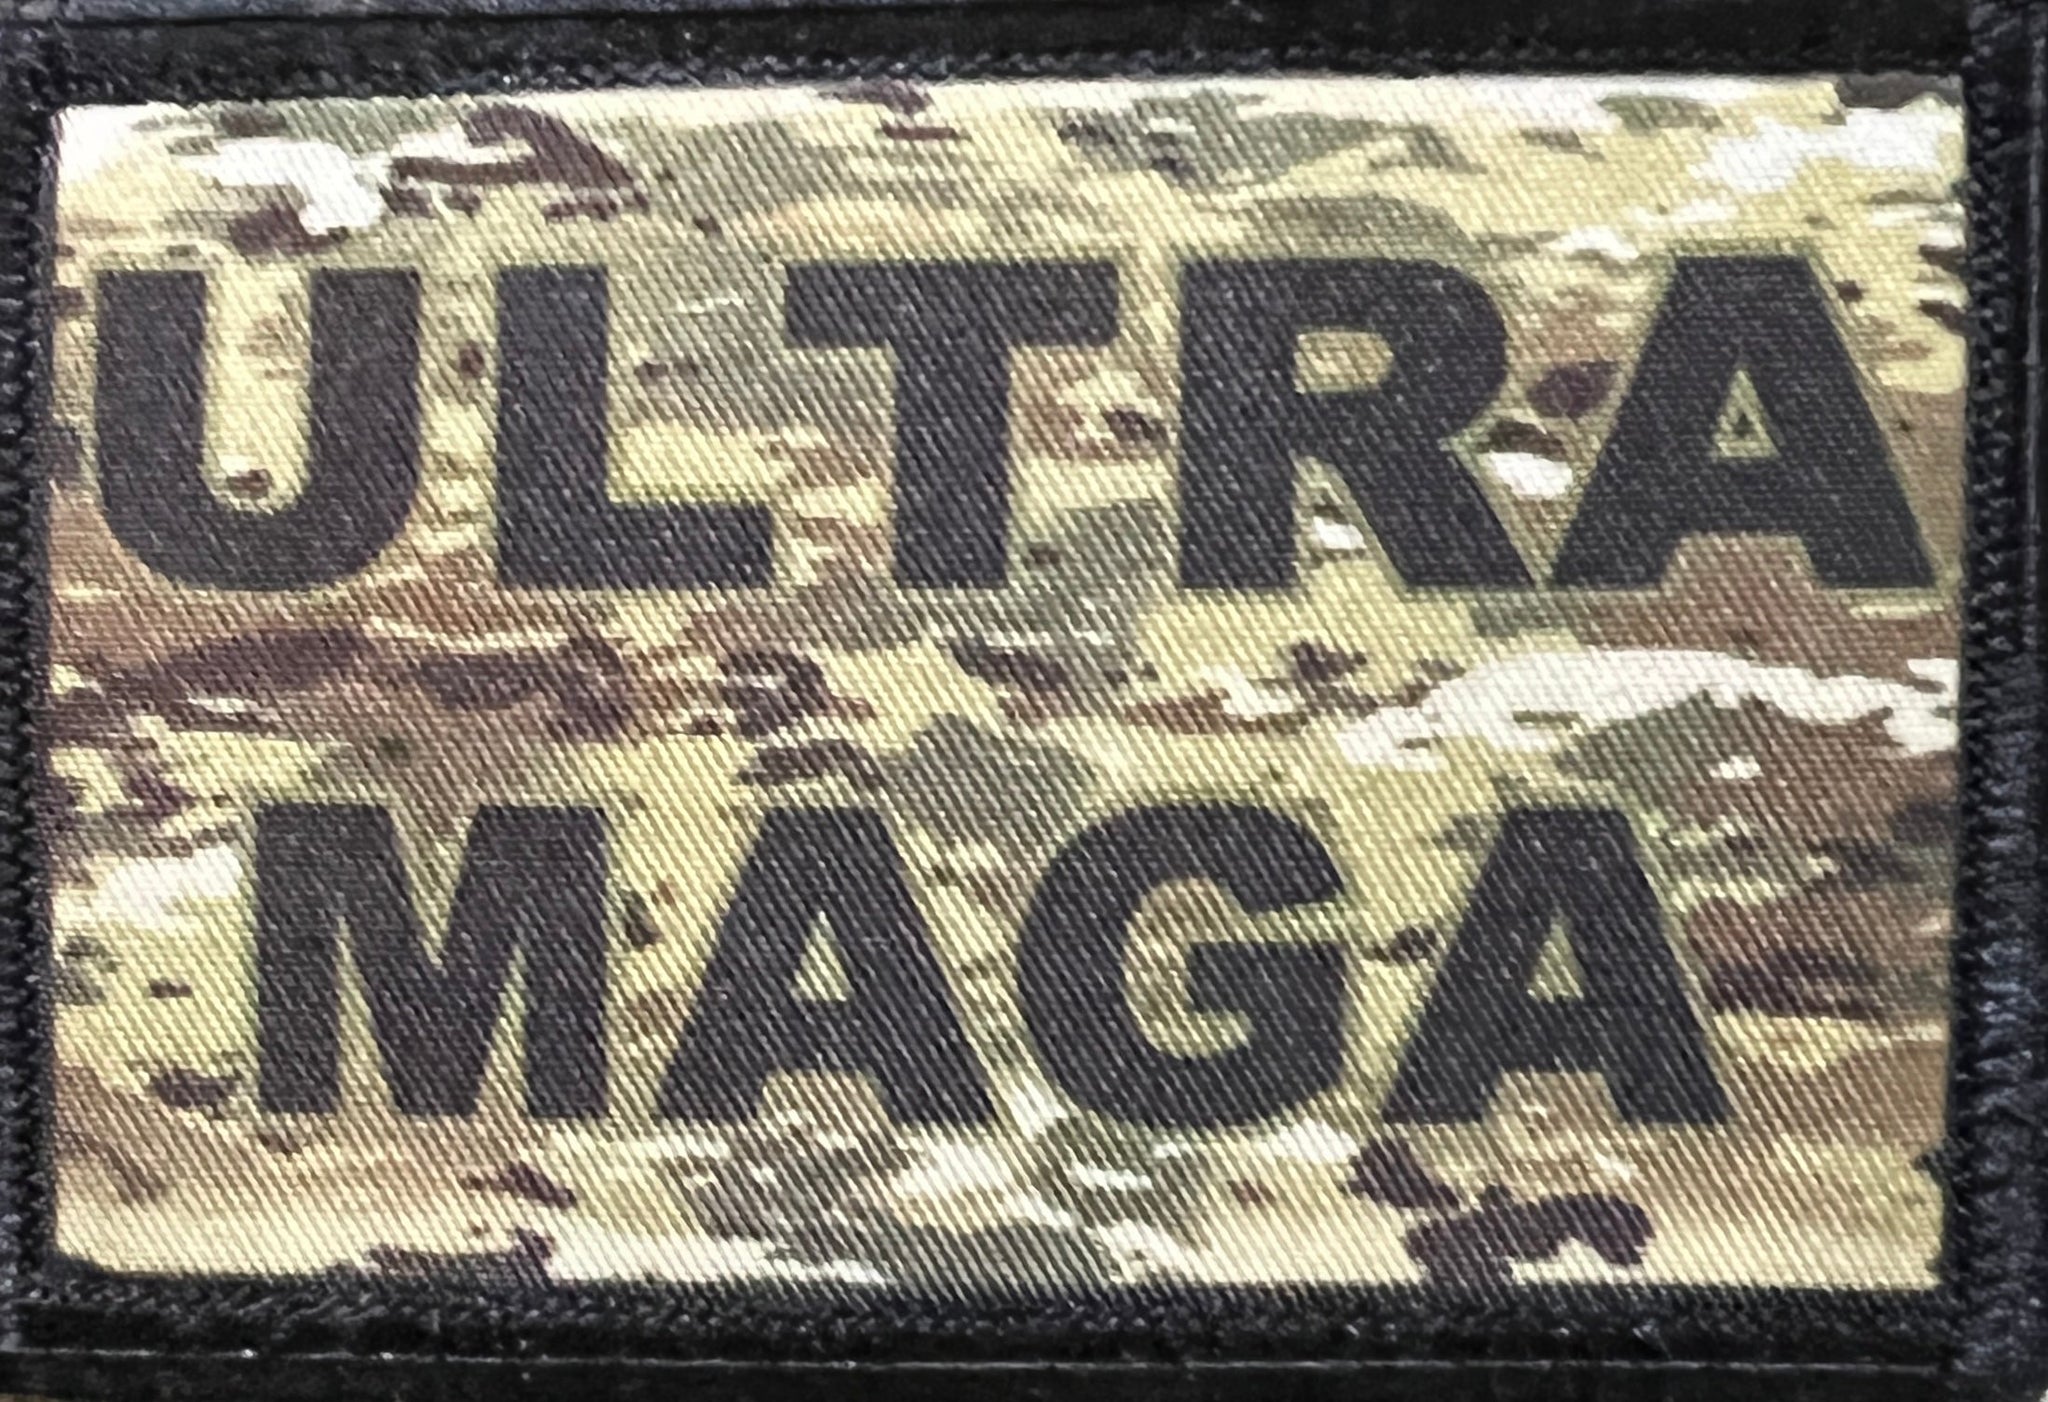 Subdued ULTRA MAGA Morale Patch Morale Patches Redheaded T Shirts 